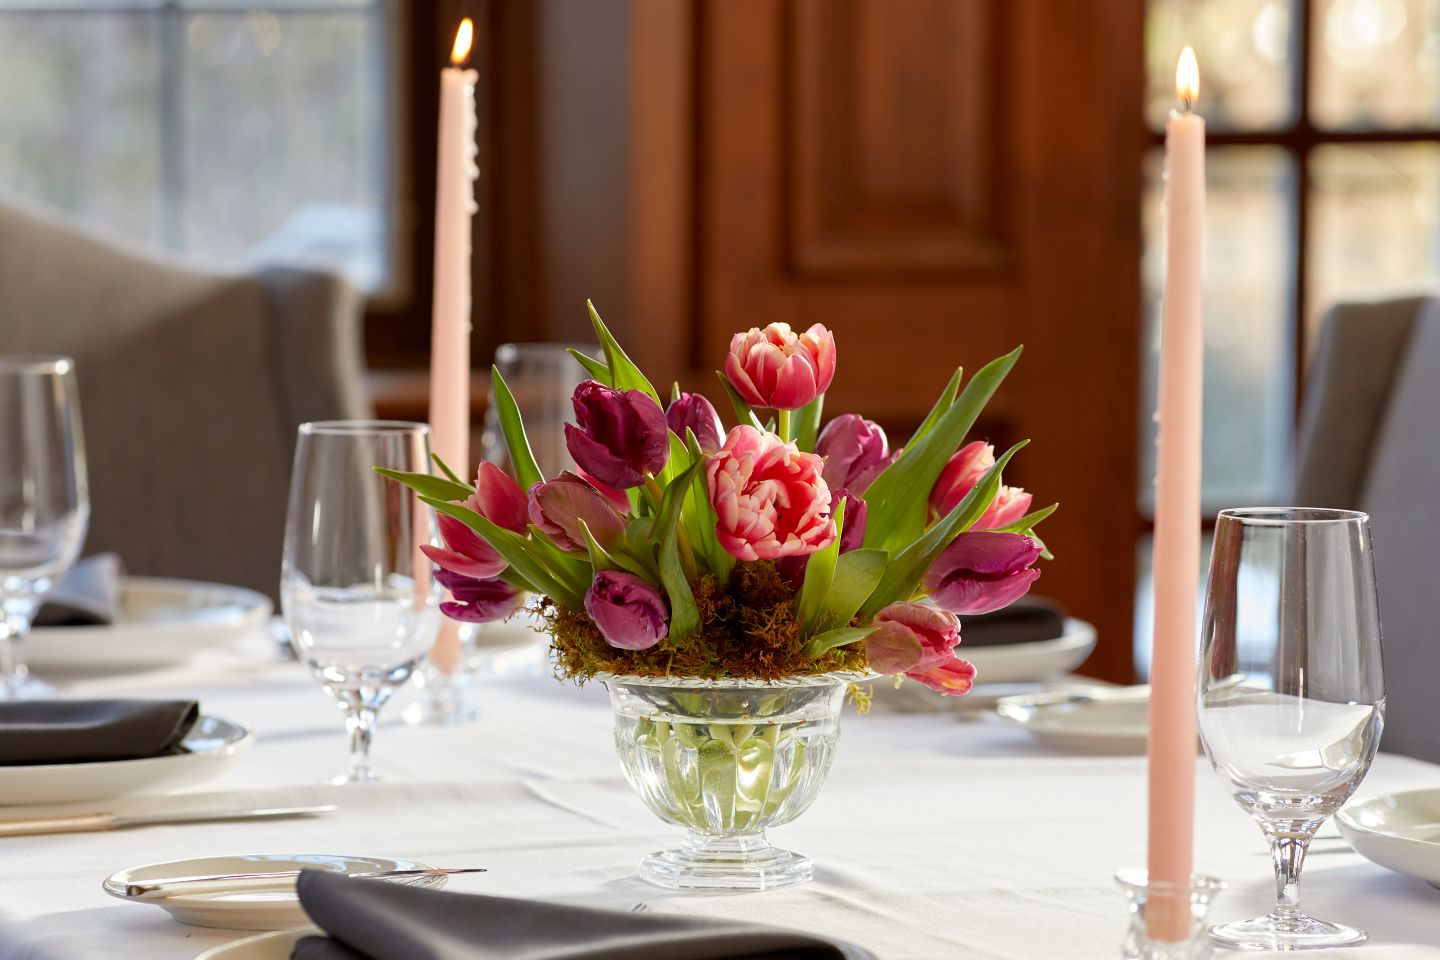 a floral arrangement on a table setting